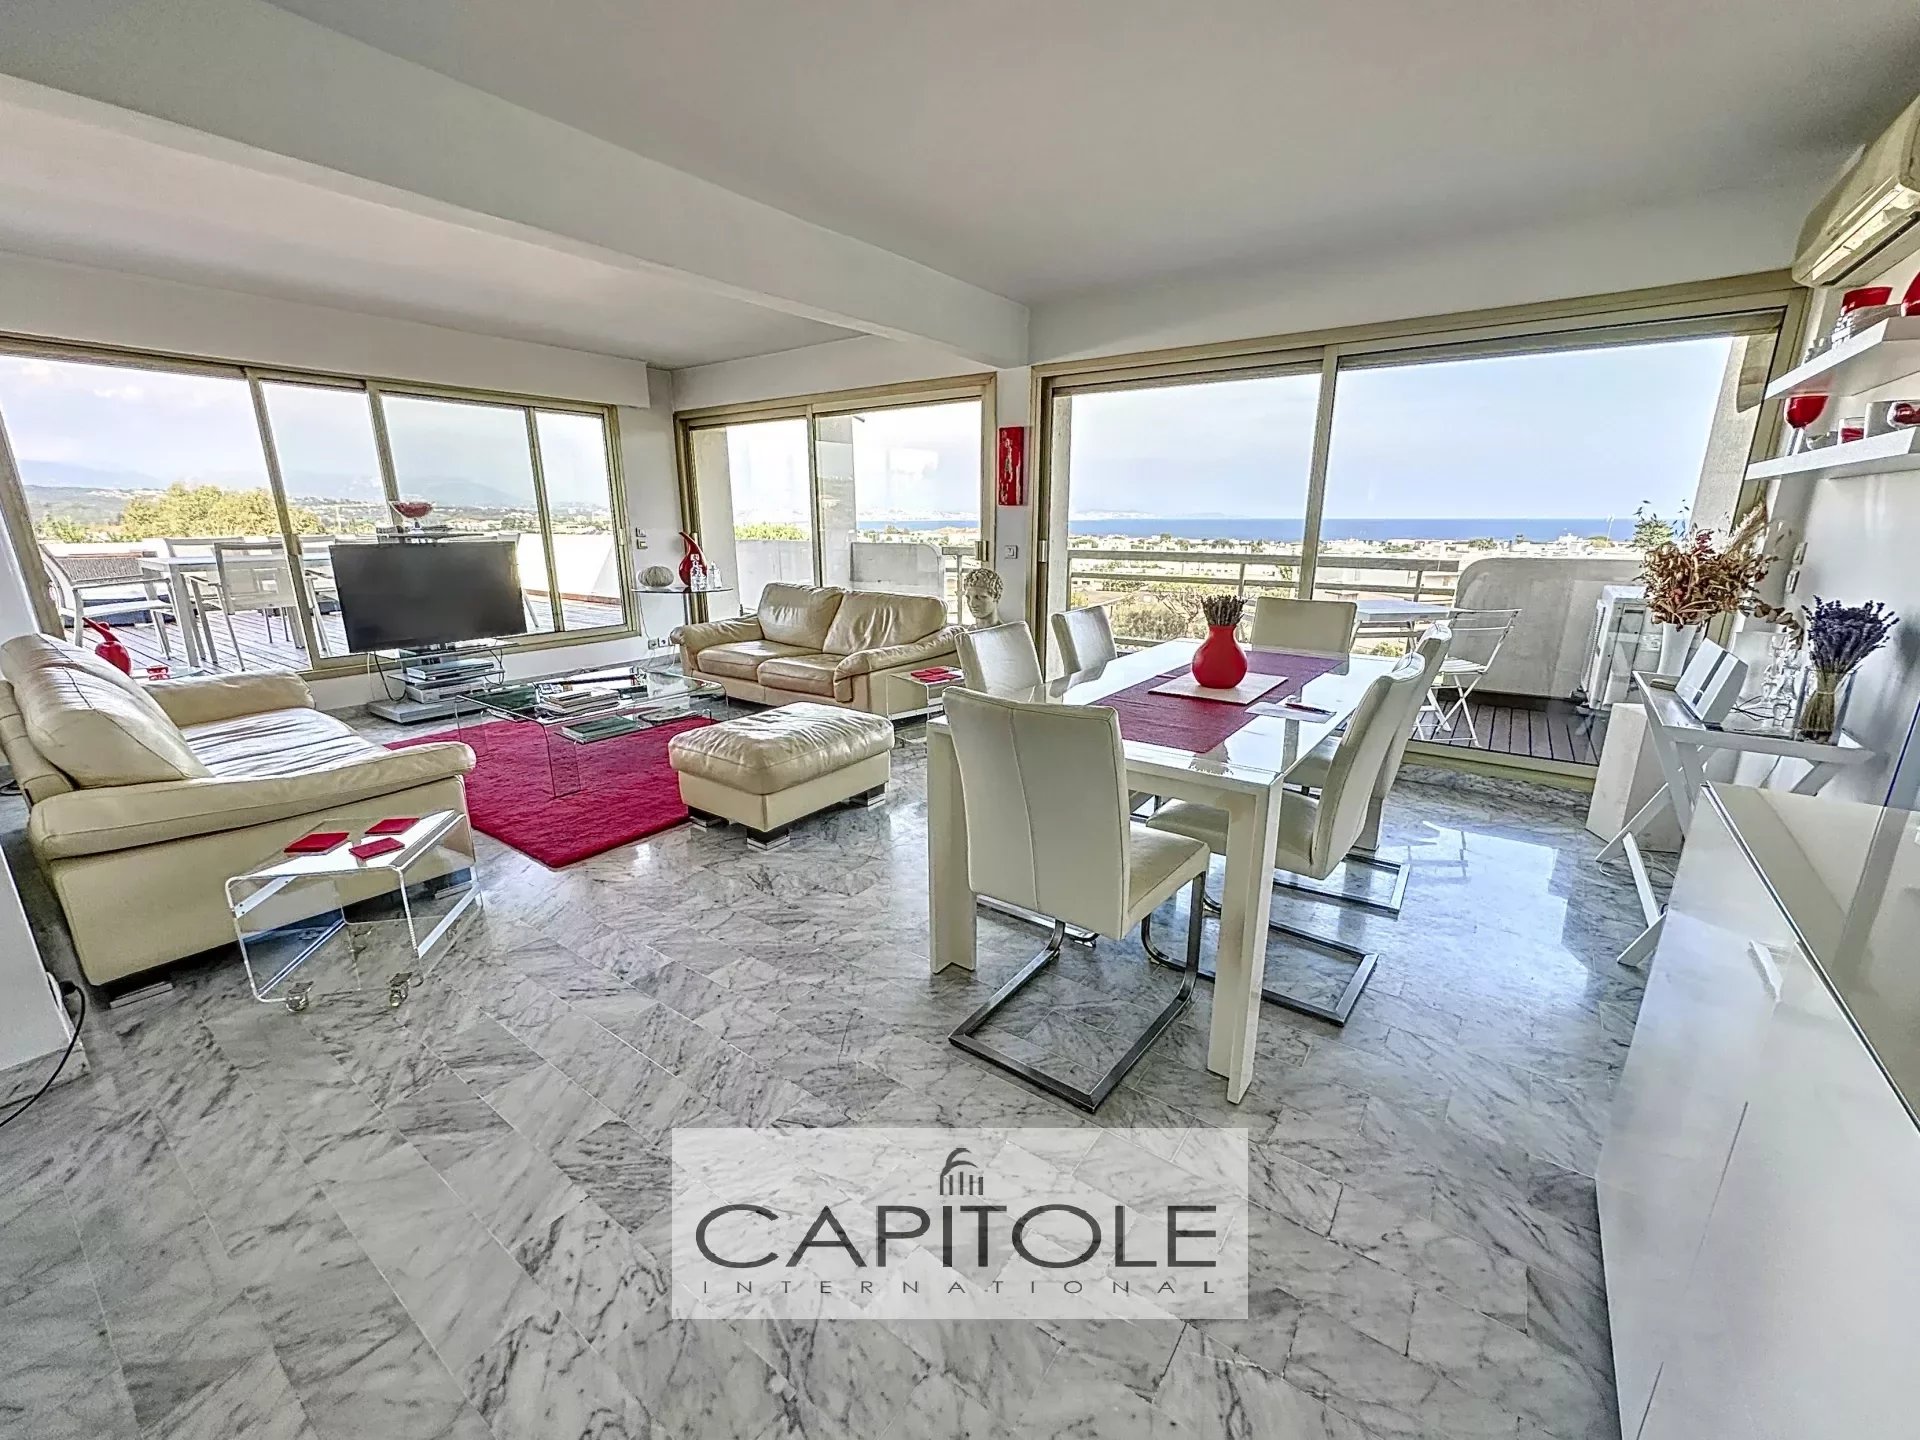 ANTIBES : Rooftop villa with panoramic sea view